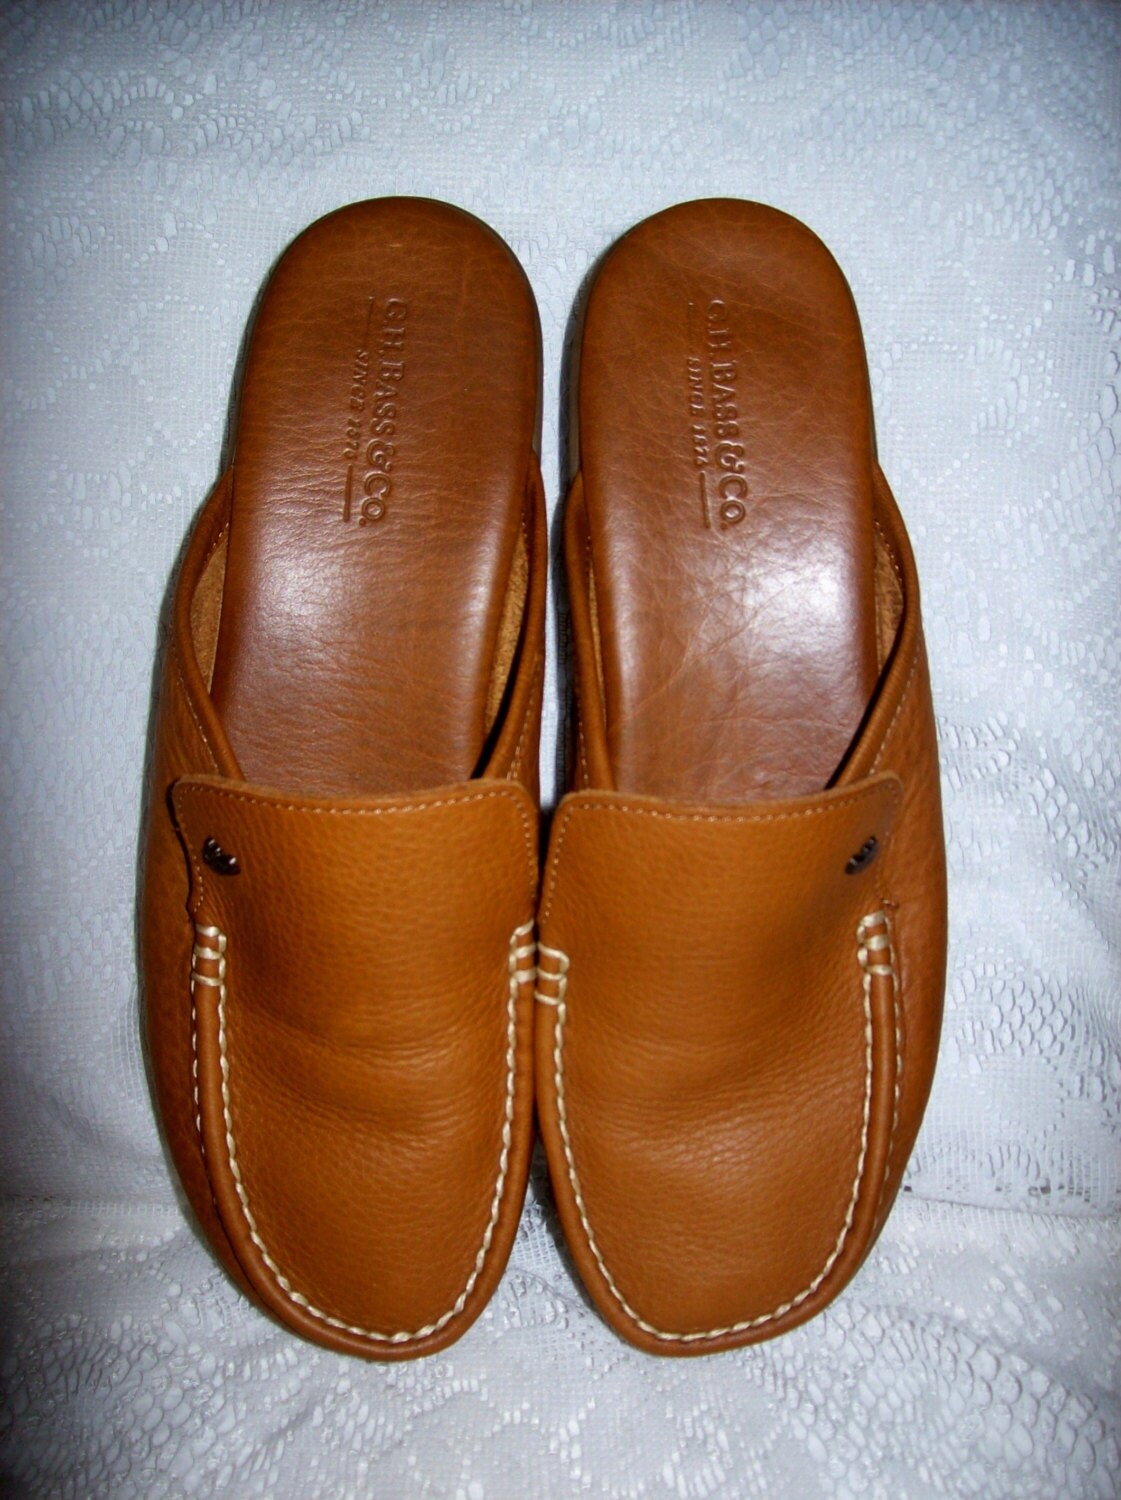 Vintage Ladies Brown Leather Mules Clogs by G. H. Bass & Co